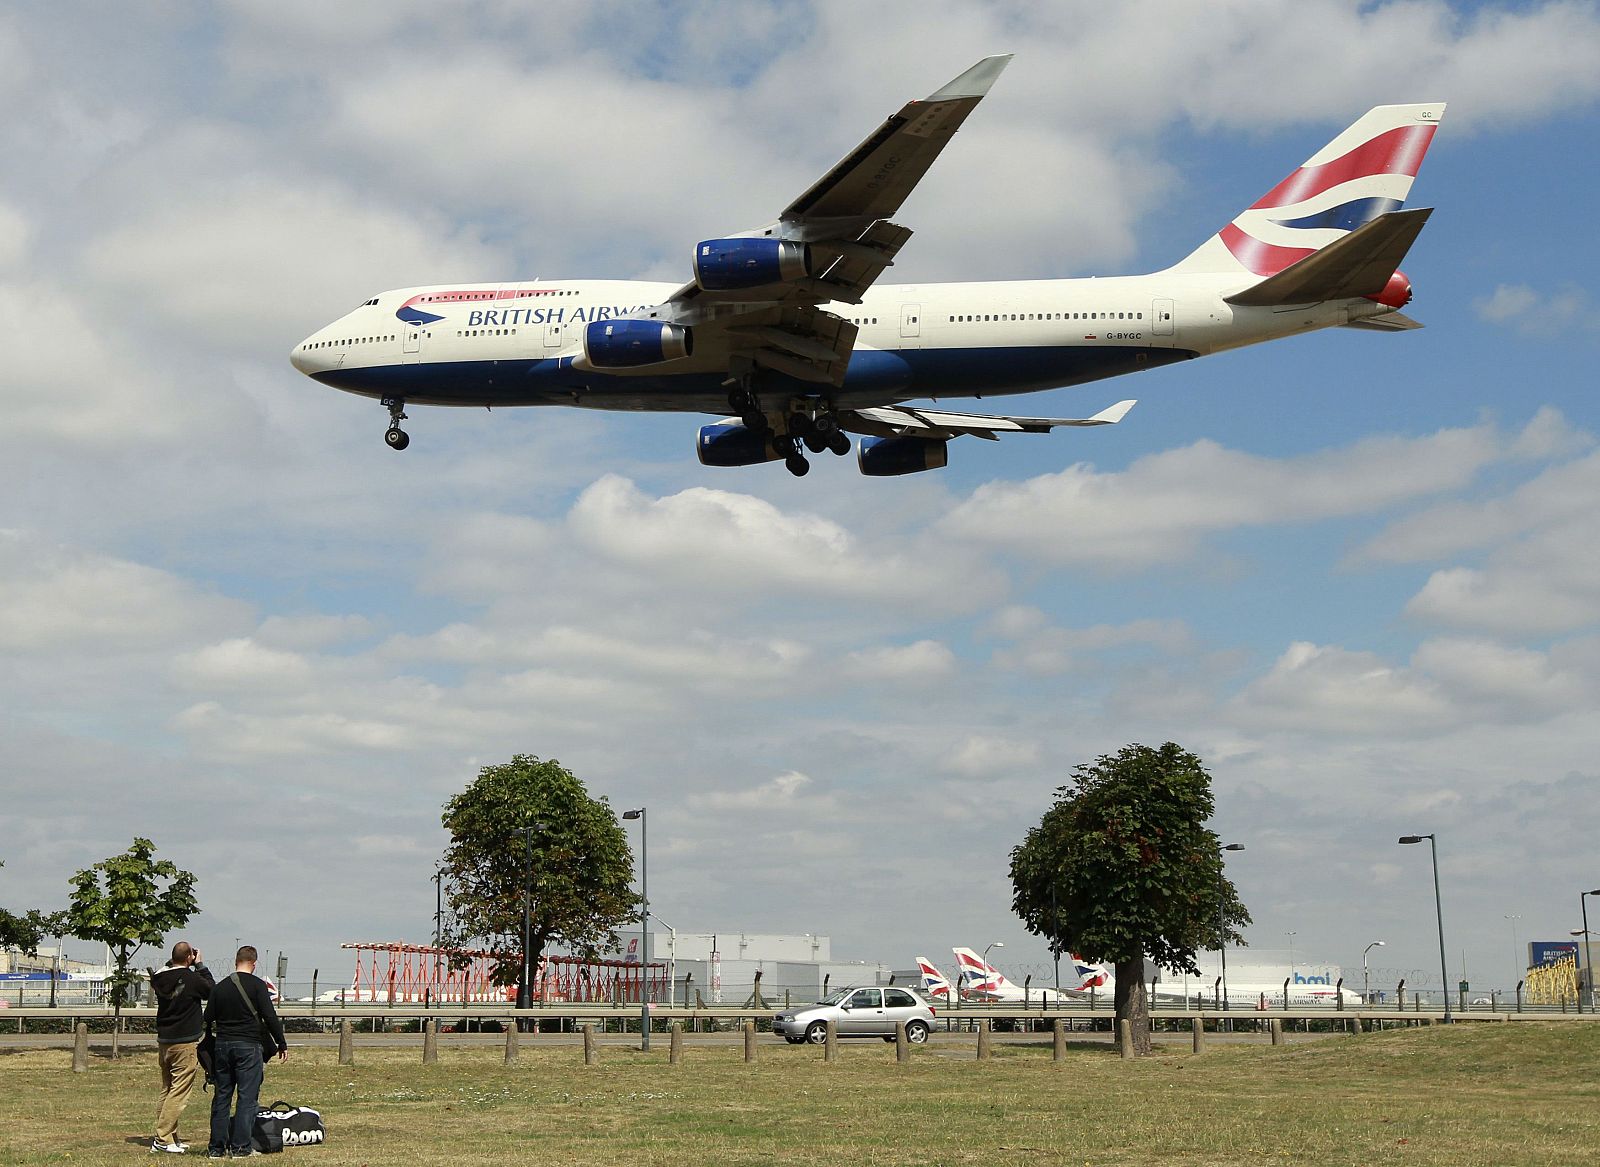 A British Airways airplane comes in to land at Heathrow Airport in west London